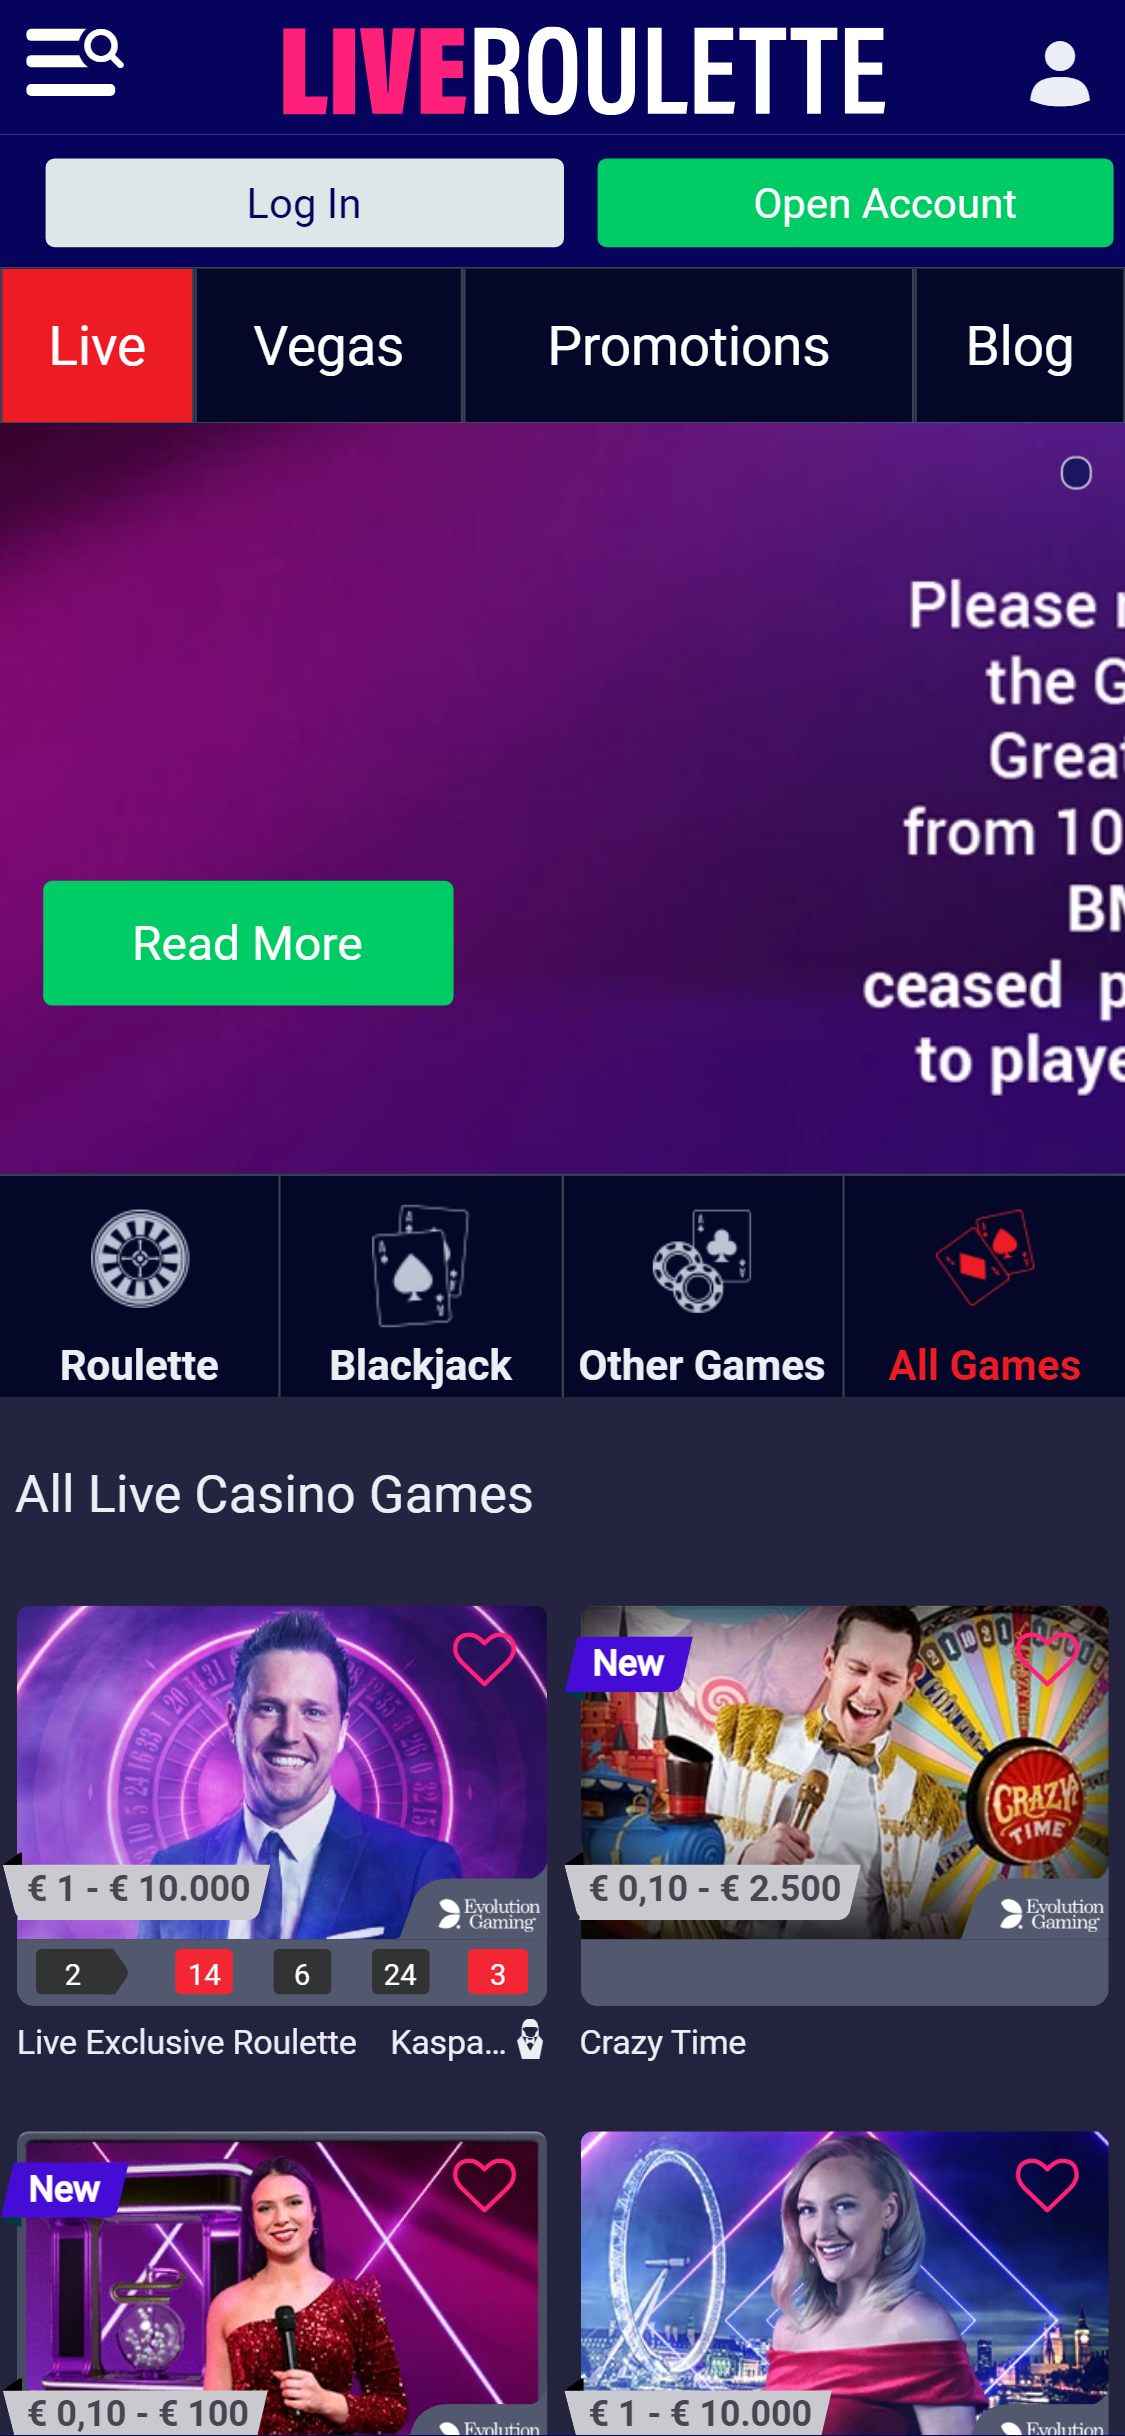 Live Roulette Casino Mobile Games Review